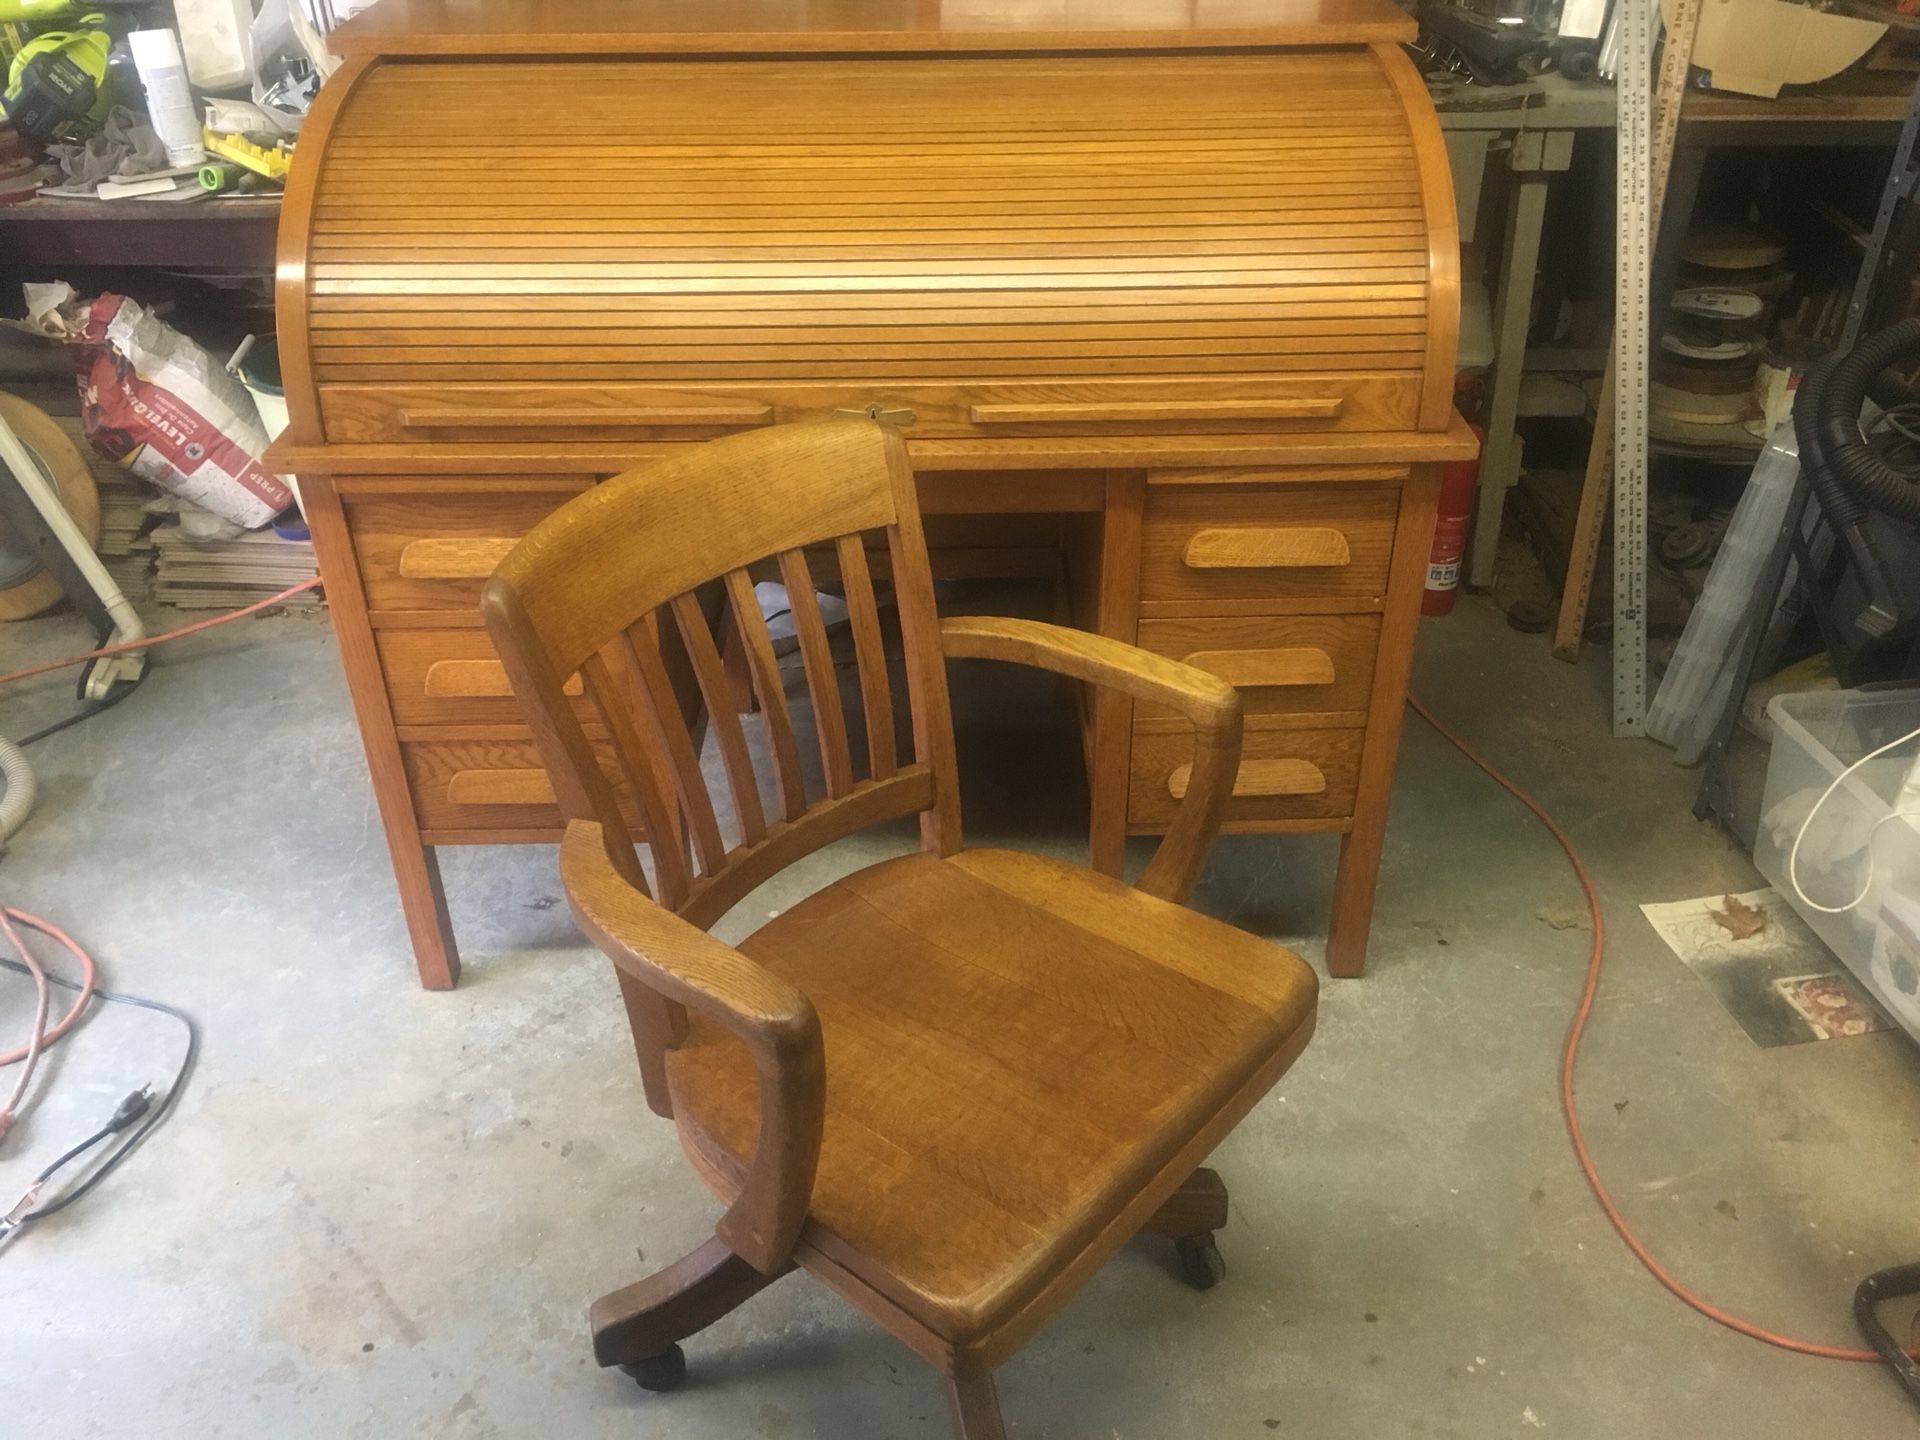 Antique rolltop desk and chair.